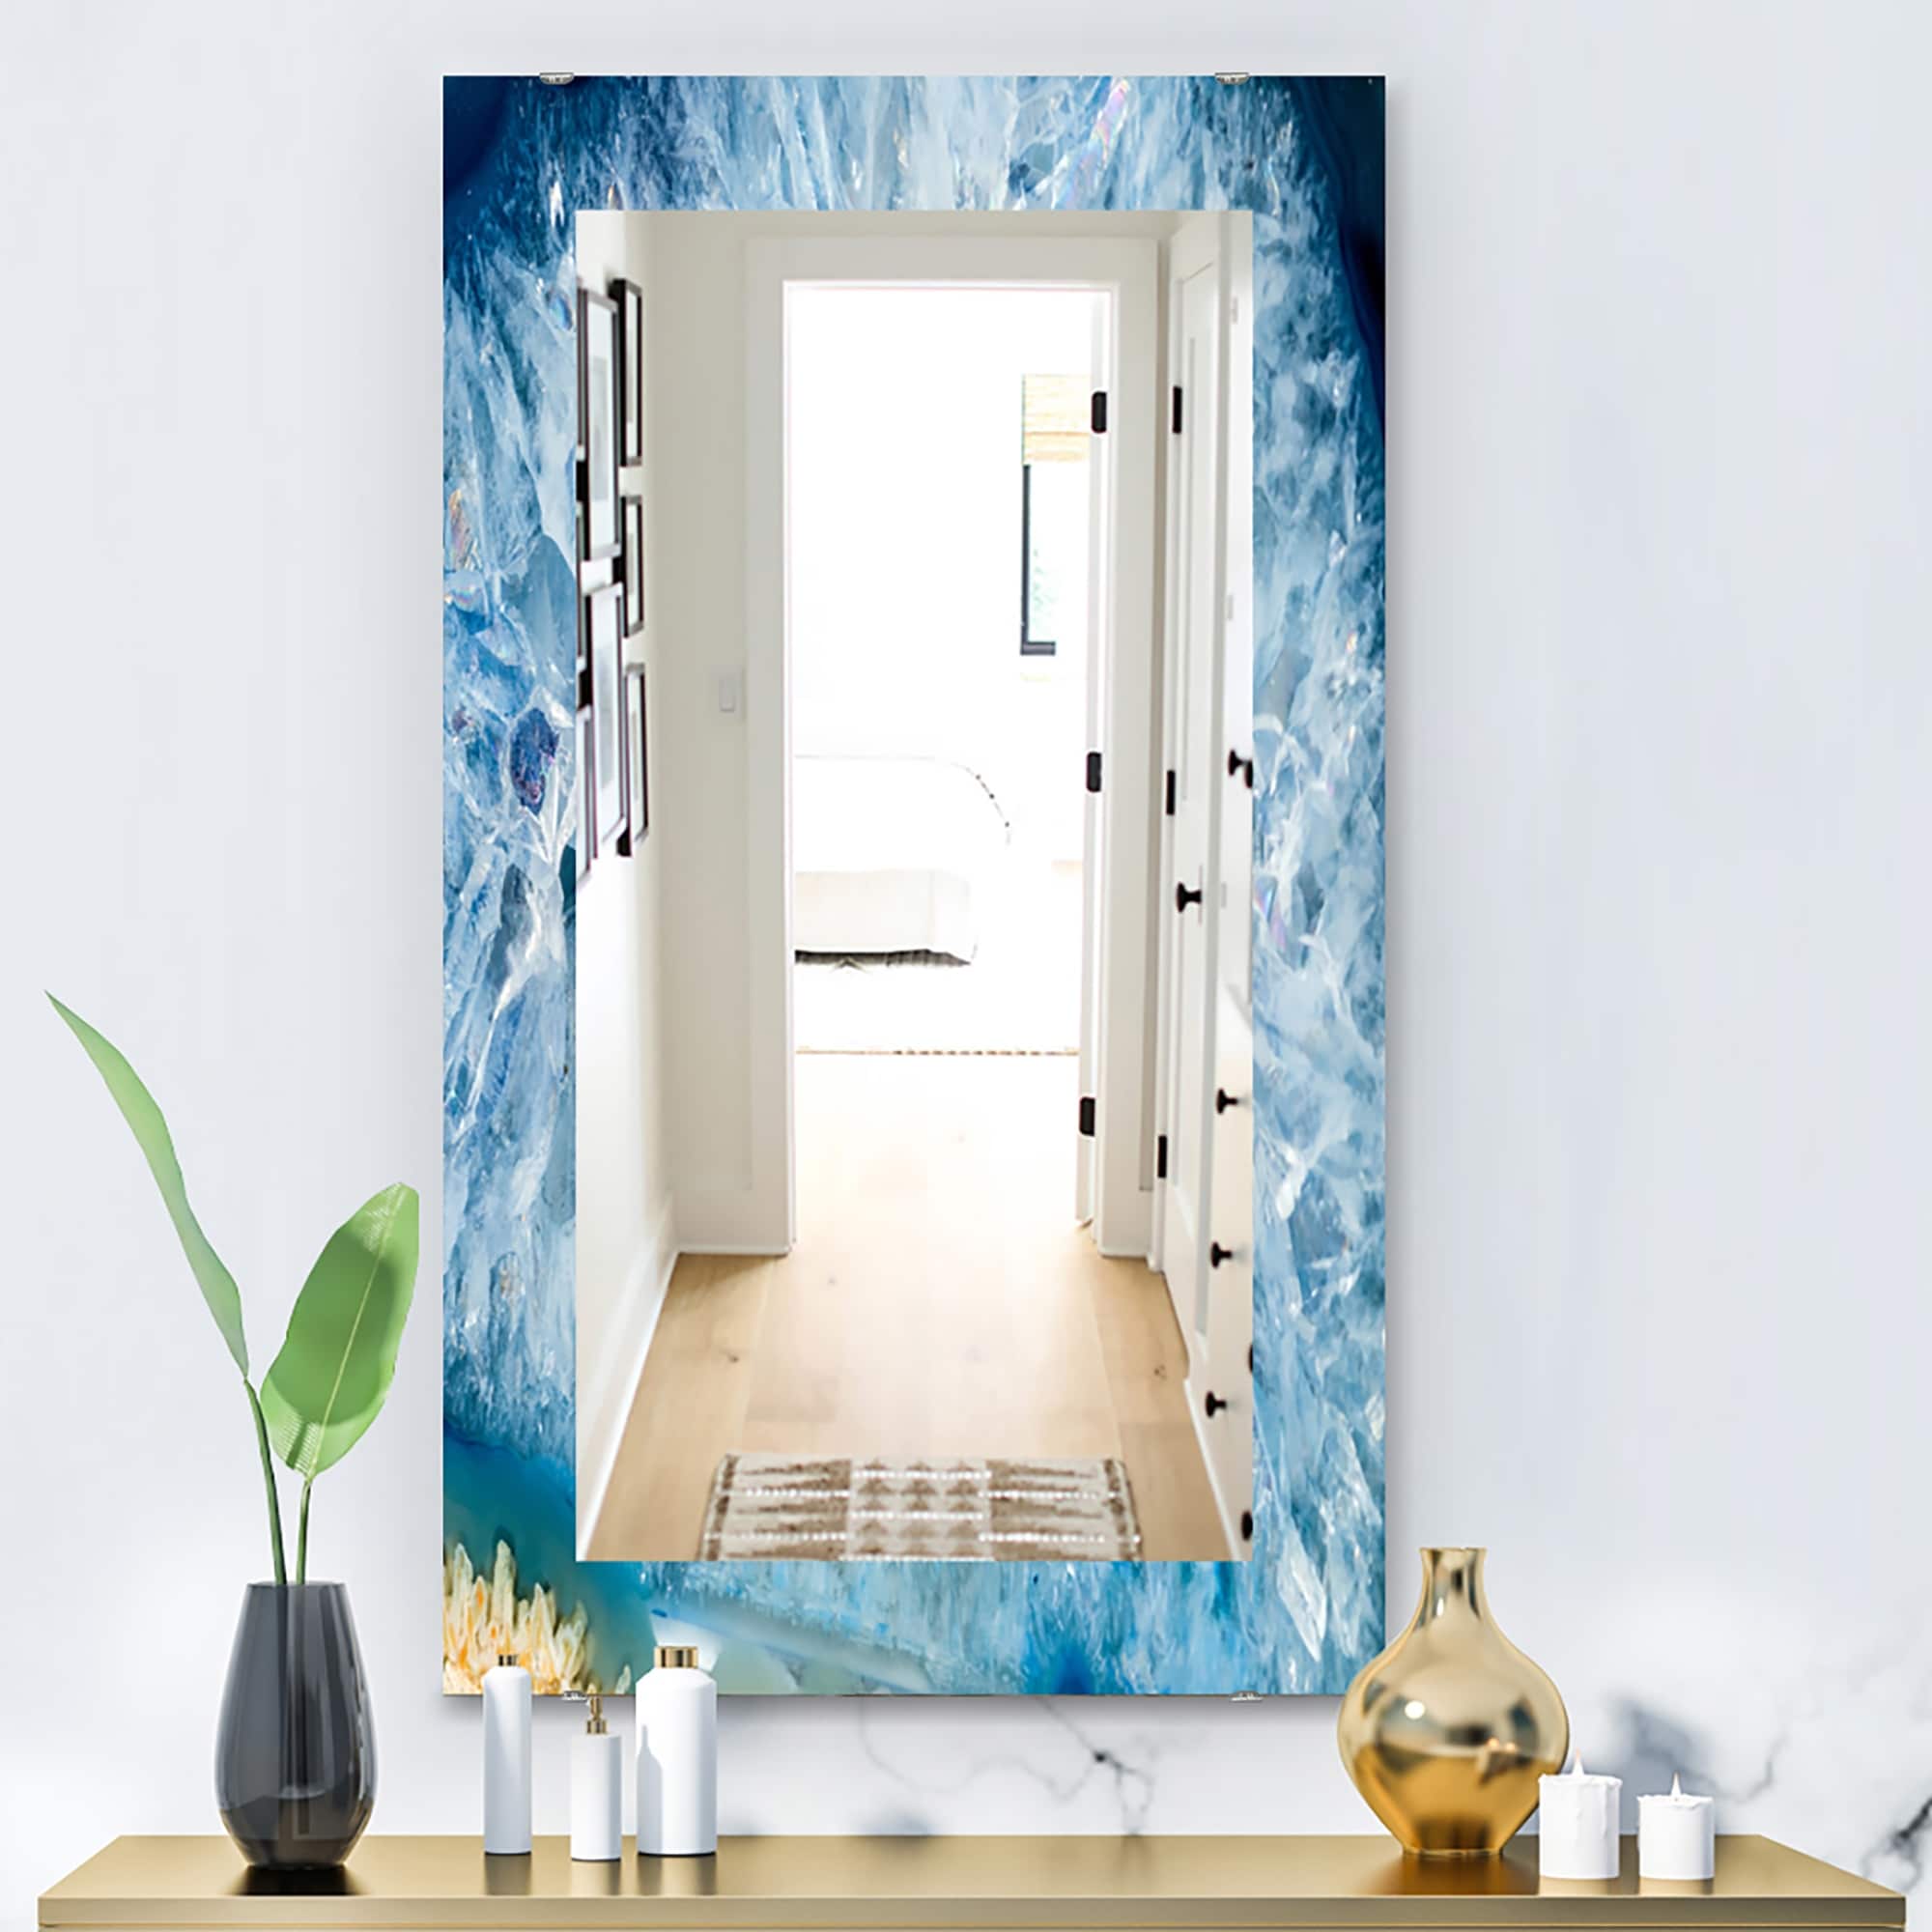 https://ak1.ostkcdn.com/images/products/is/images/direct/9a40f2bf9b0ac0973148e0a842752aa76c0cf5e4/Designart-%27Geode-Interior-With-Light-Blue-Crystals%27-Mid-Century-Mirror---Vanity-Mirror.jpg